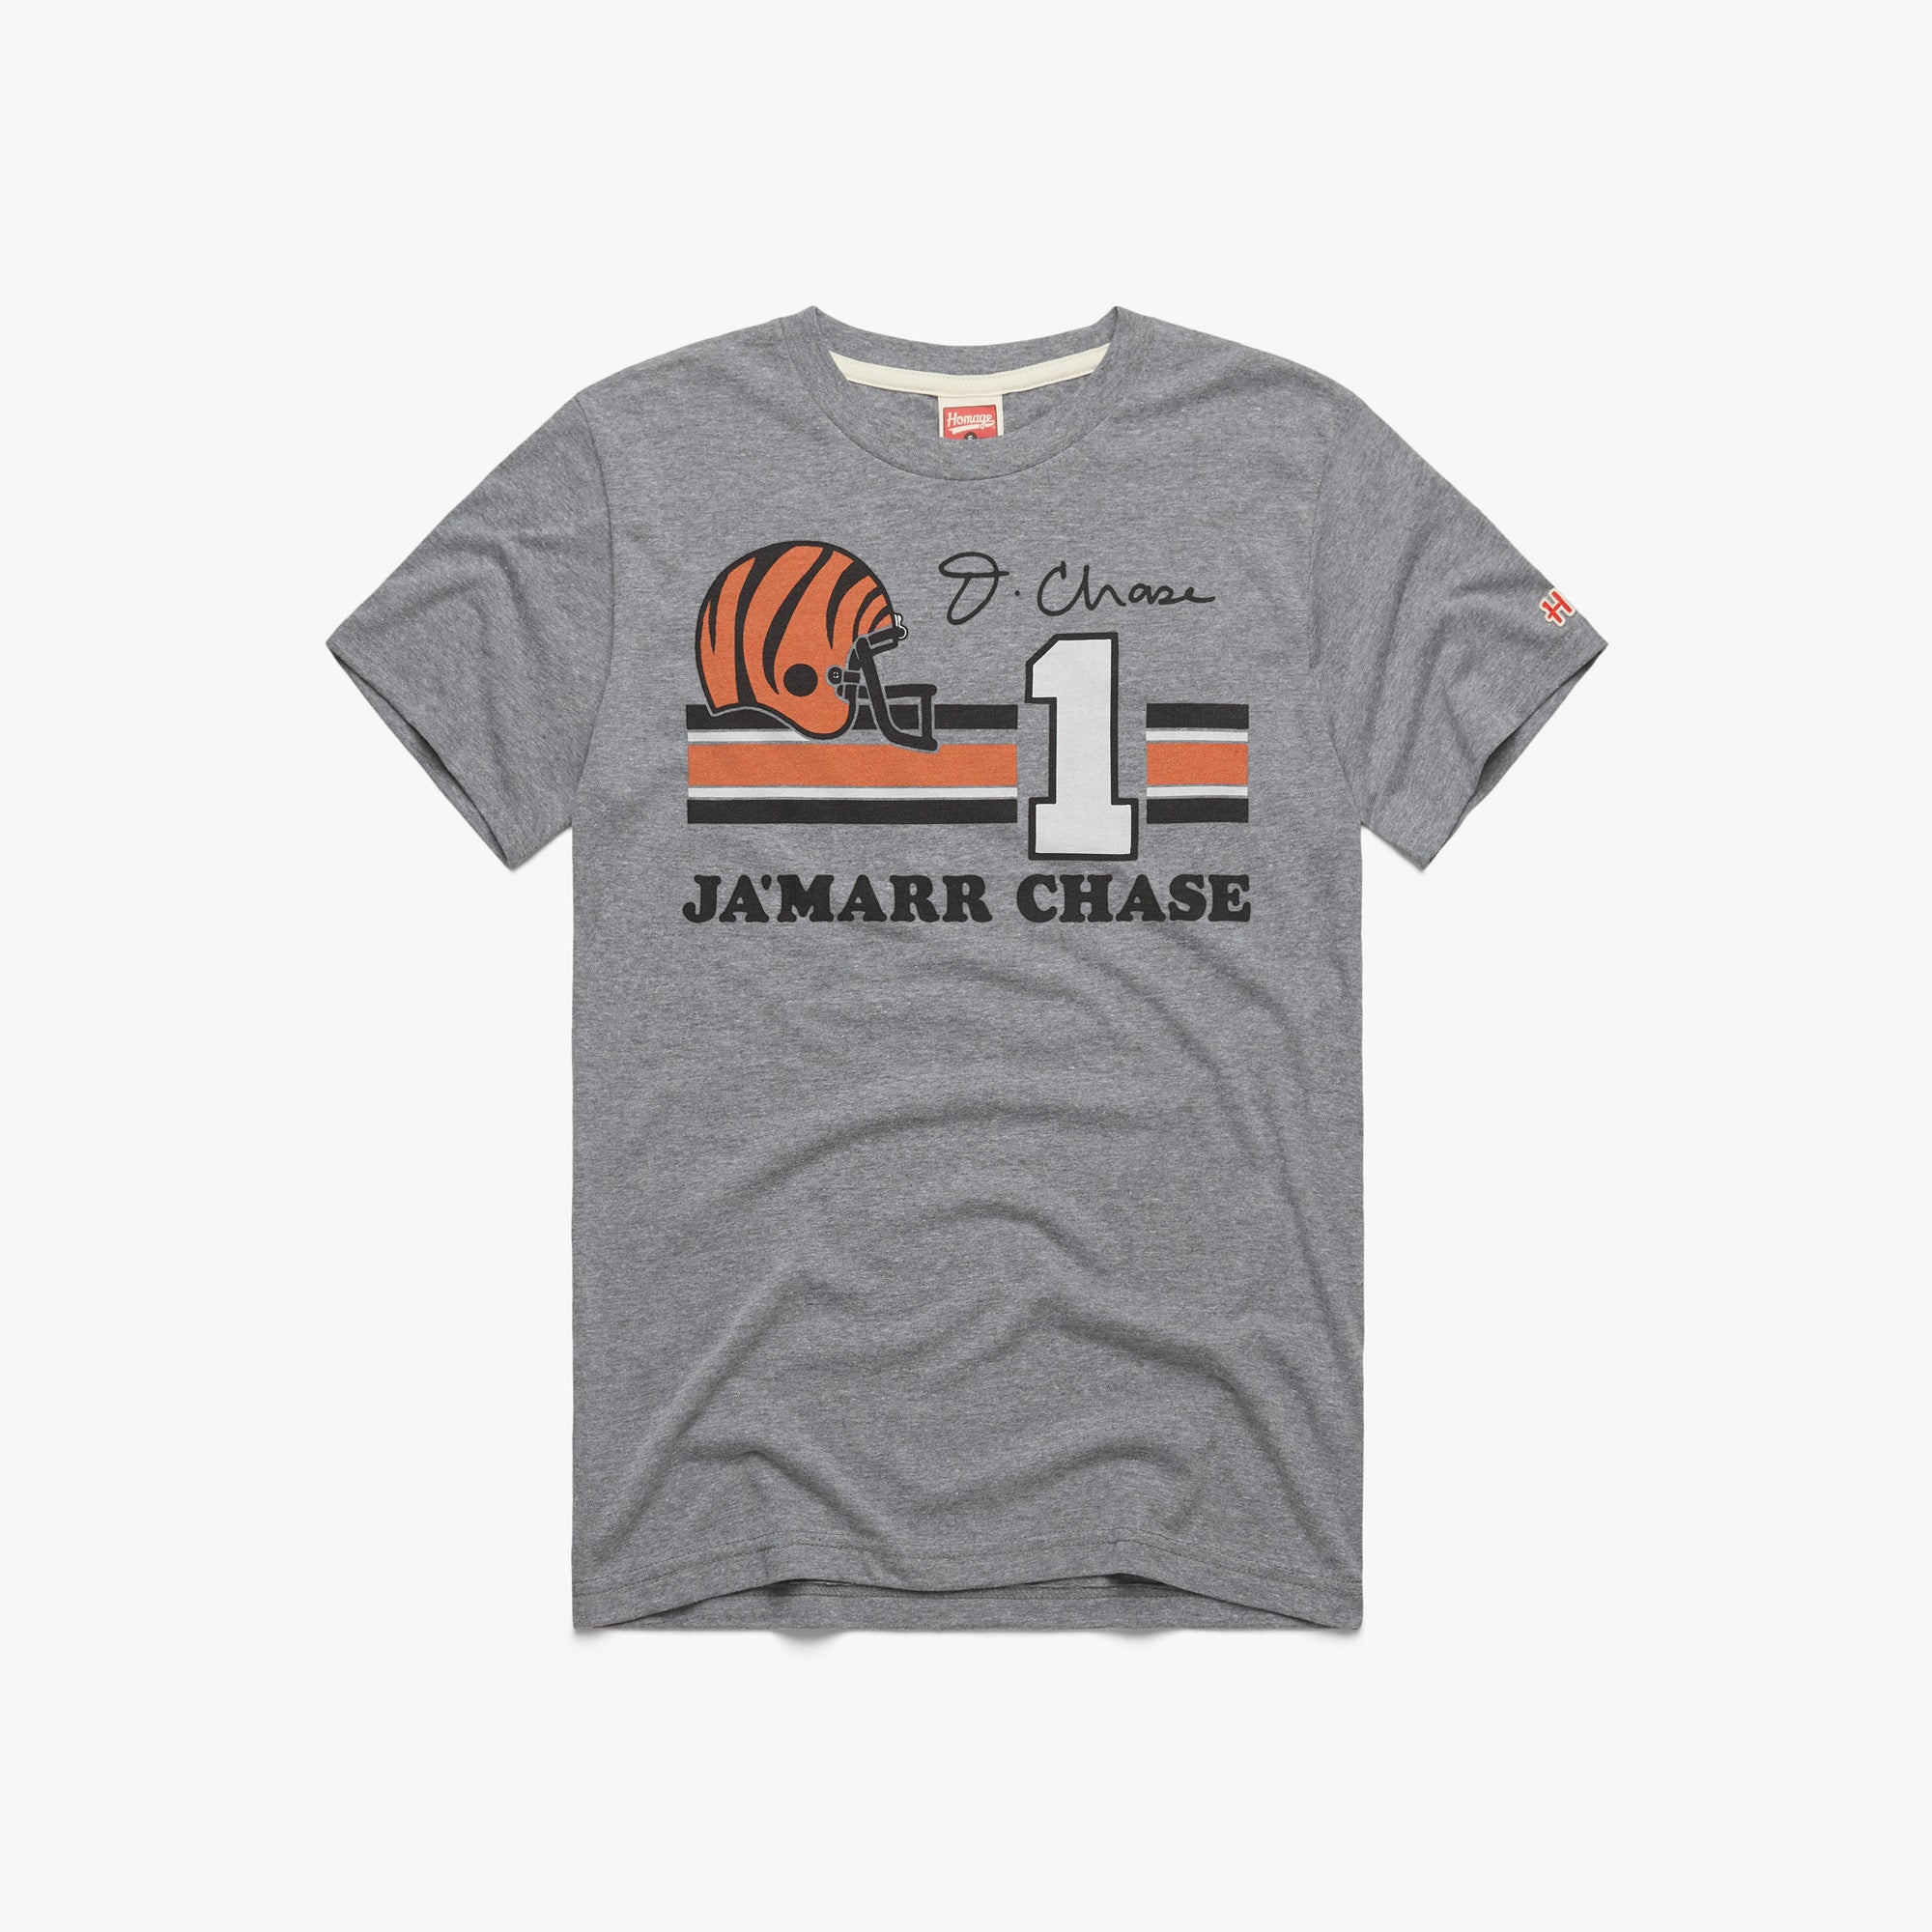 Cincinnati Bengals Ja'Marr Chase #1 T-Shirt from Homage. | Officially Licensed Vintage NFL Apparel from Homage Pro Shop.